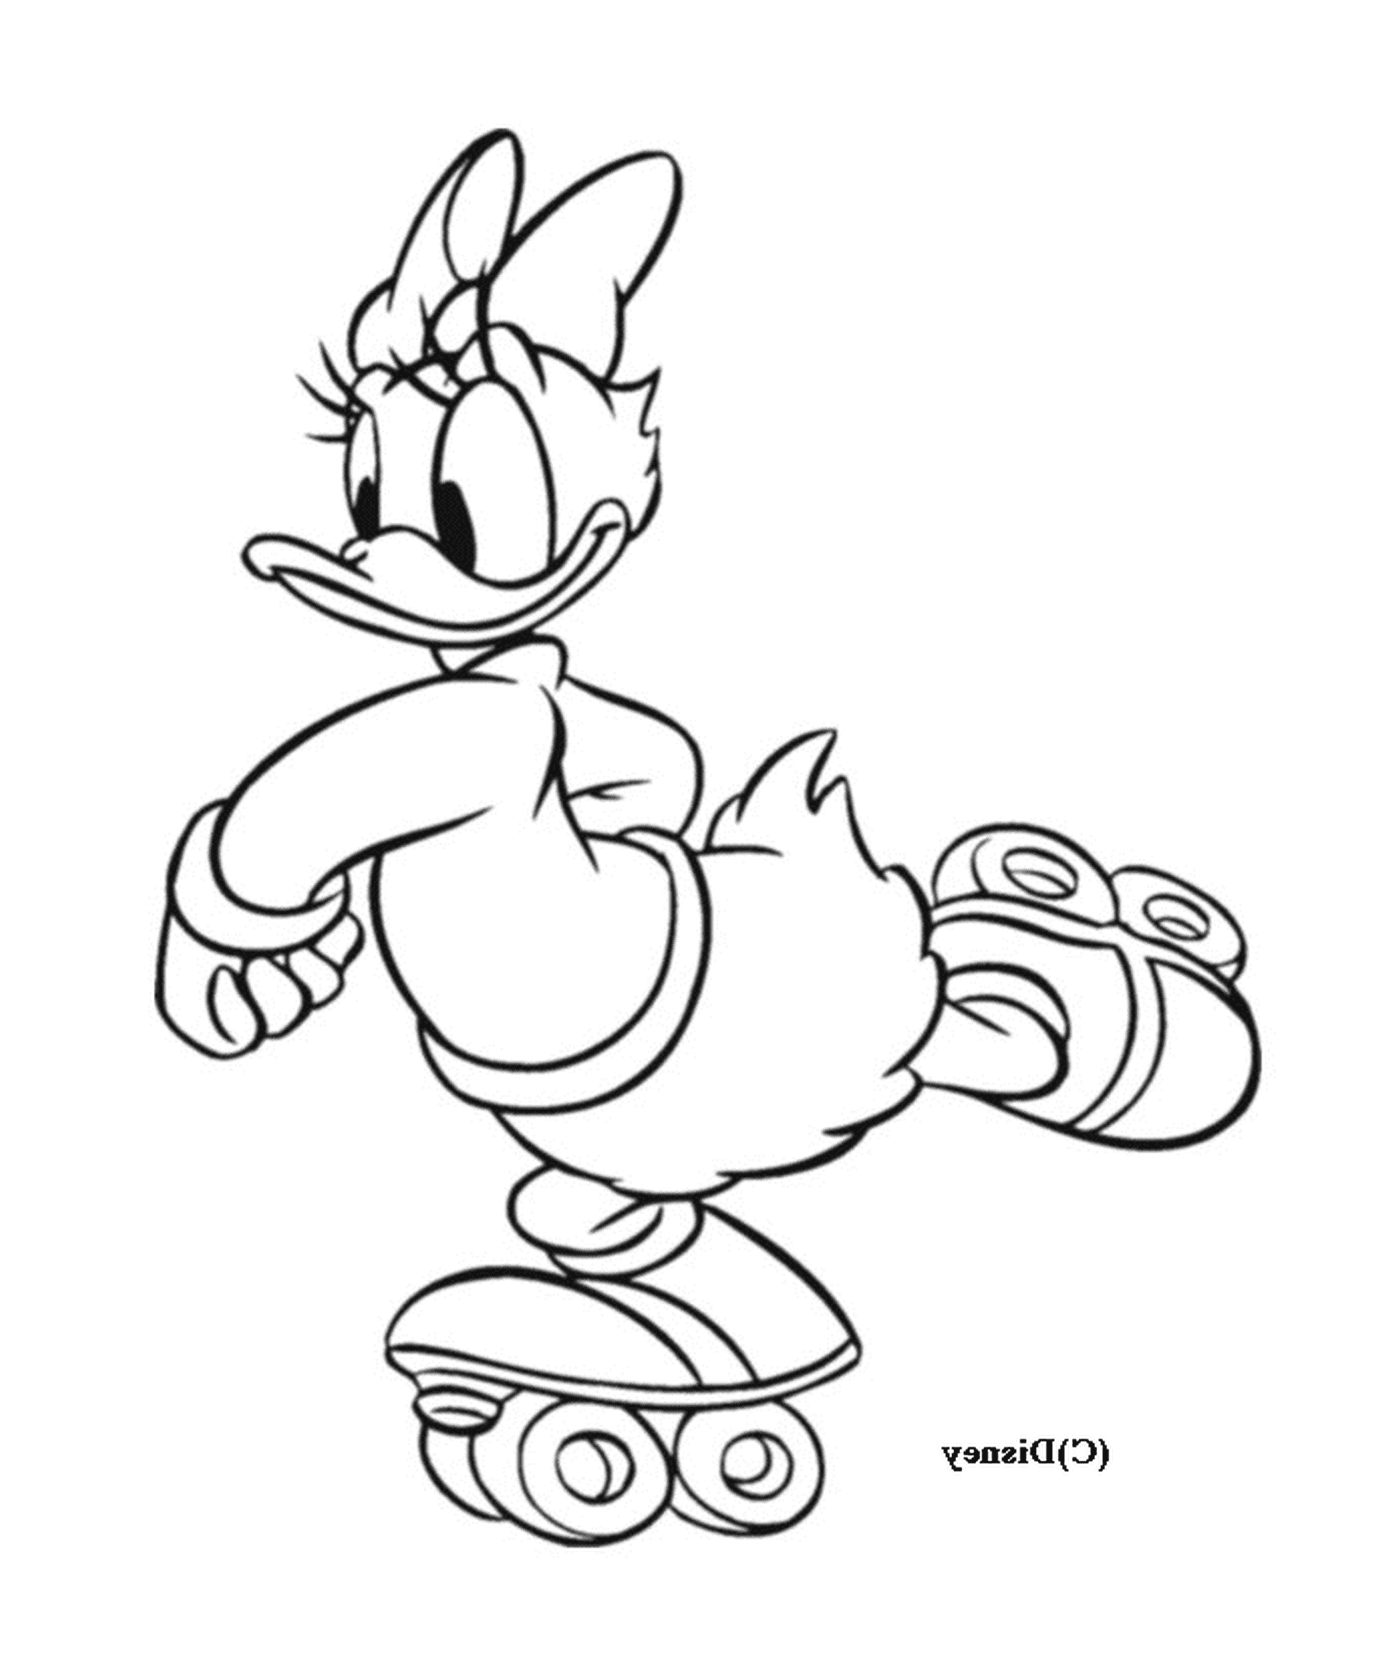  Daisy's doing rollerblading with ease 